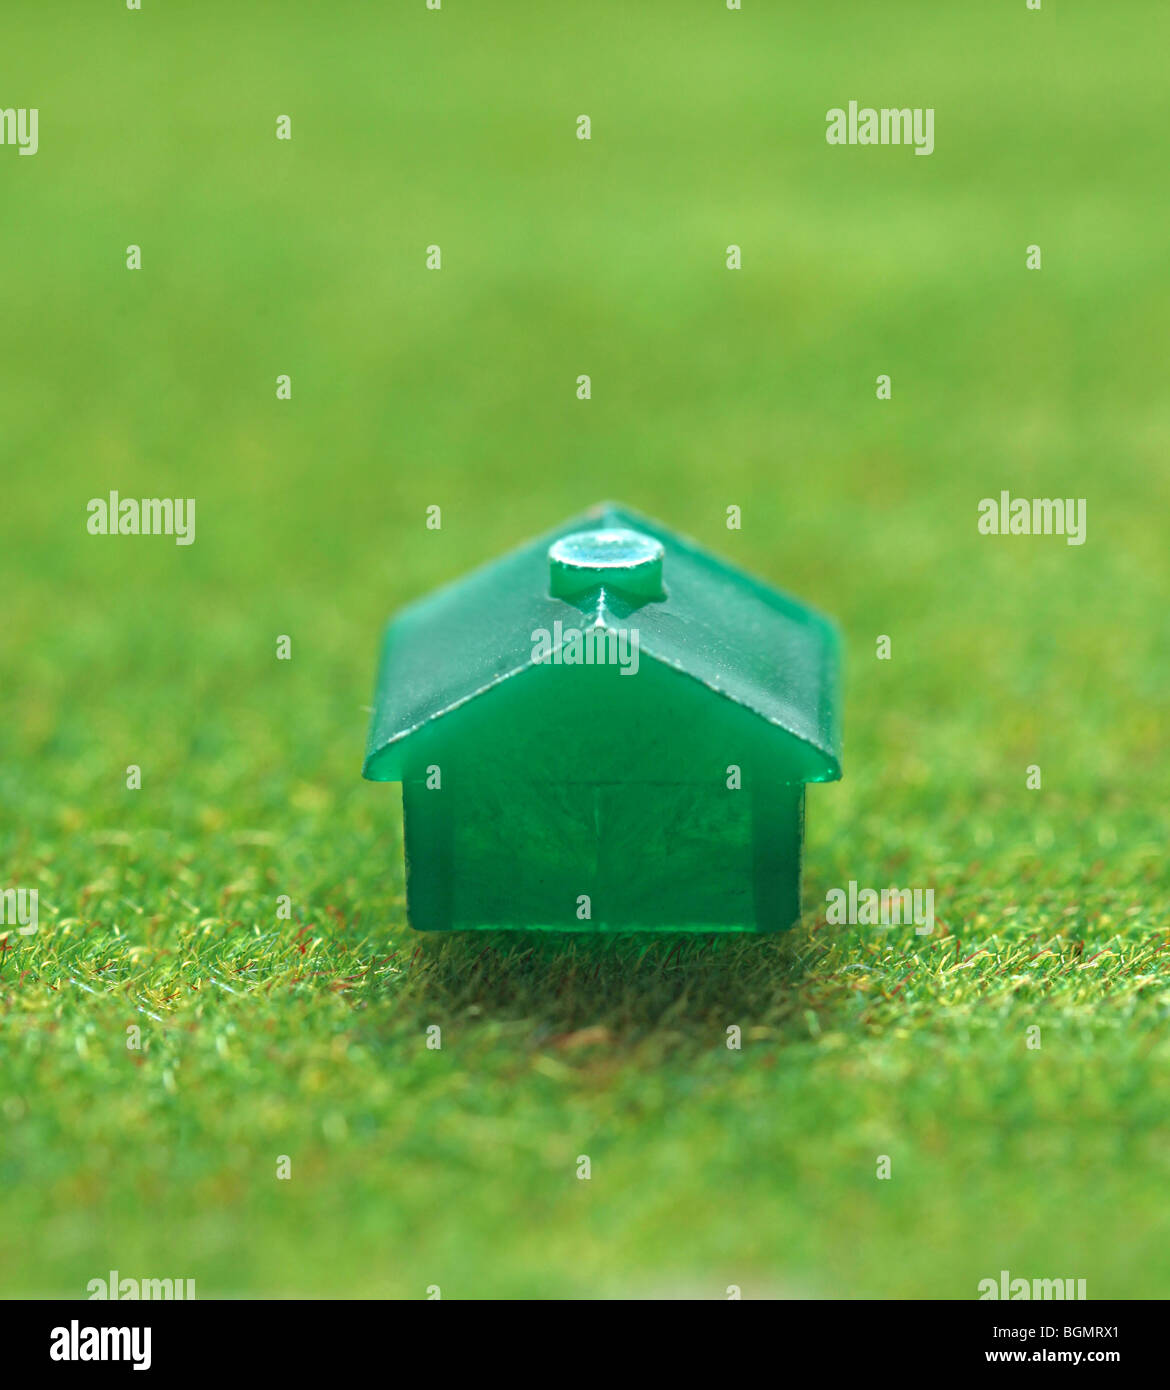 small green house on grass Stock Photo